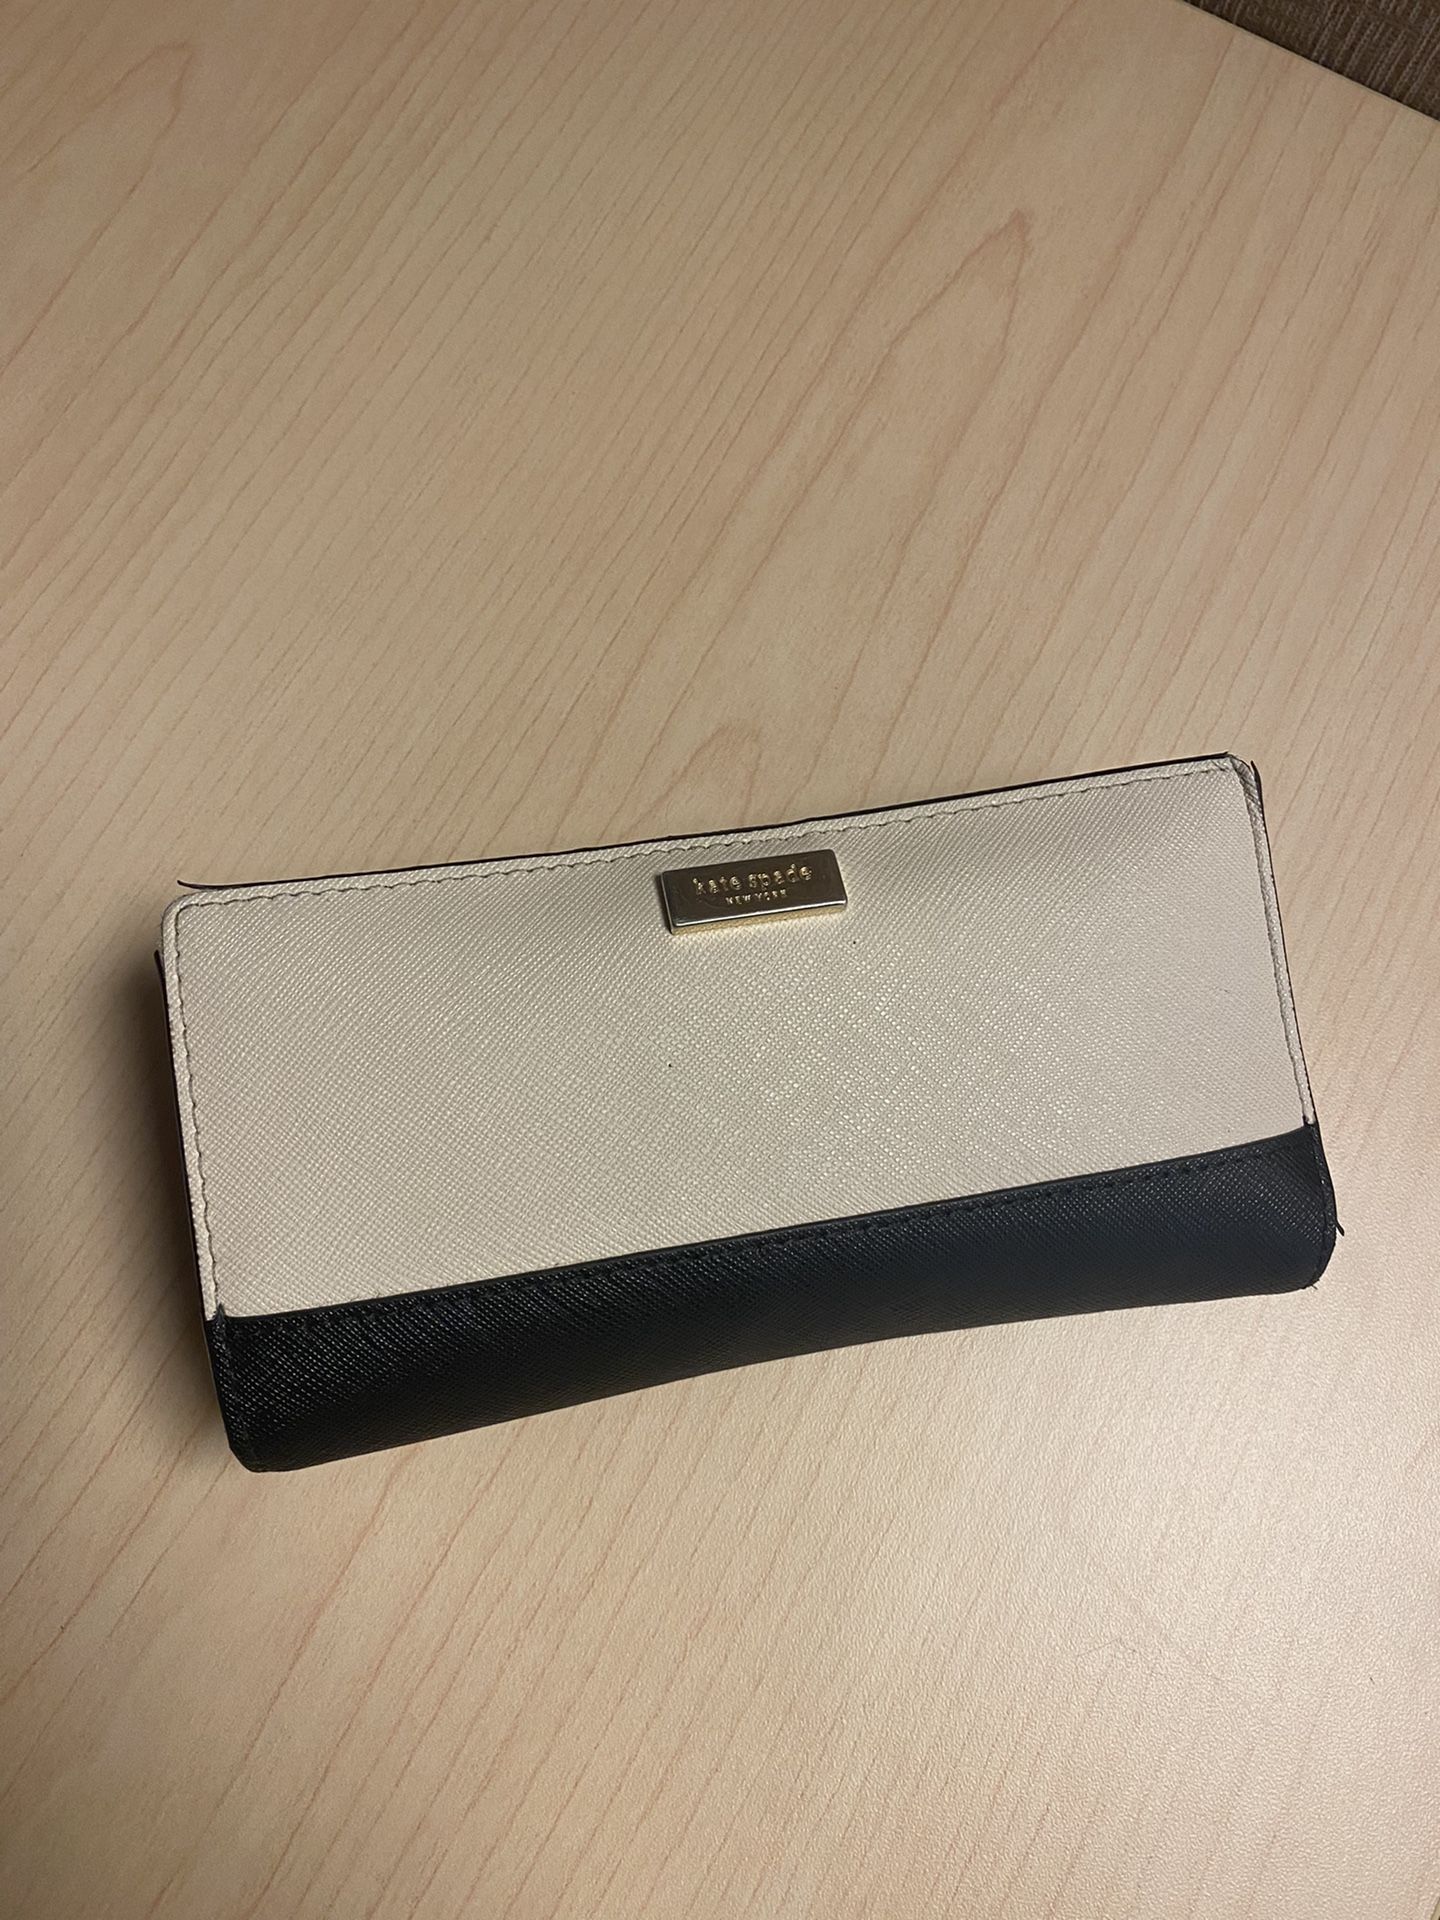 Kate Spade Wallet Black And Off-White